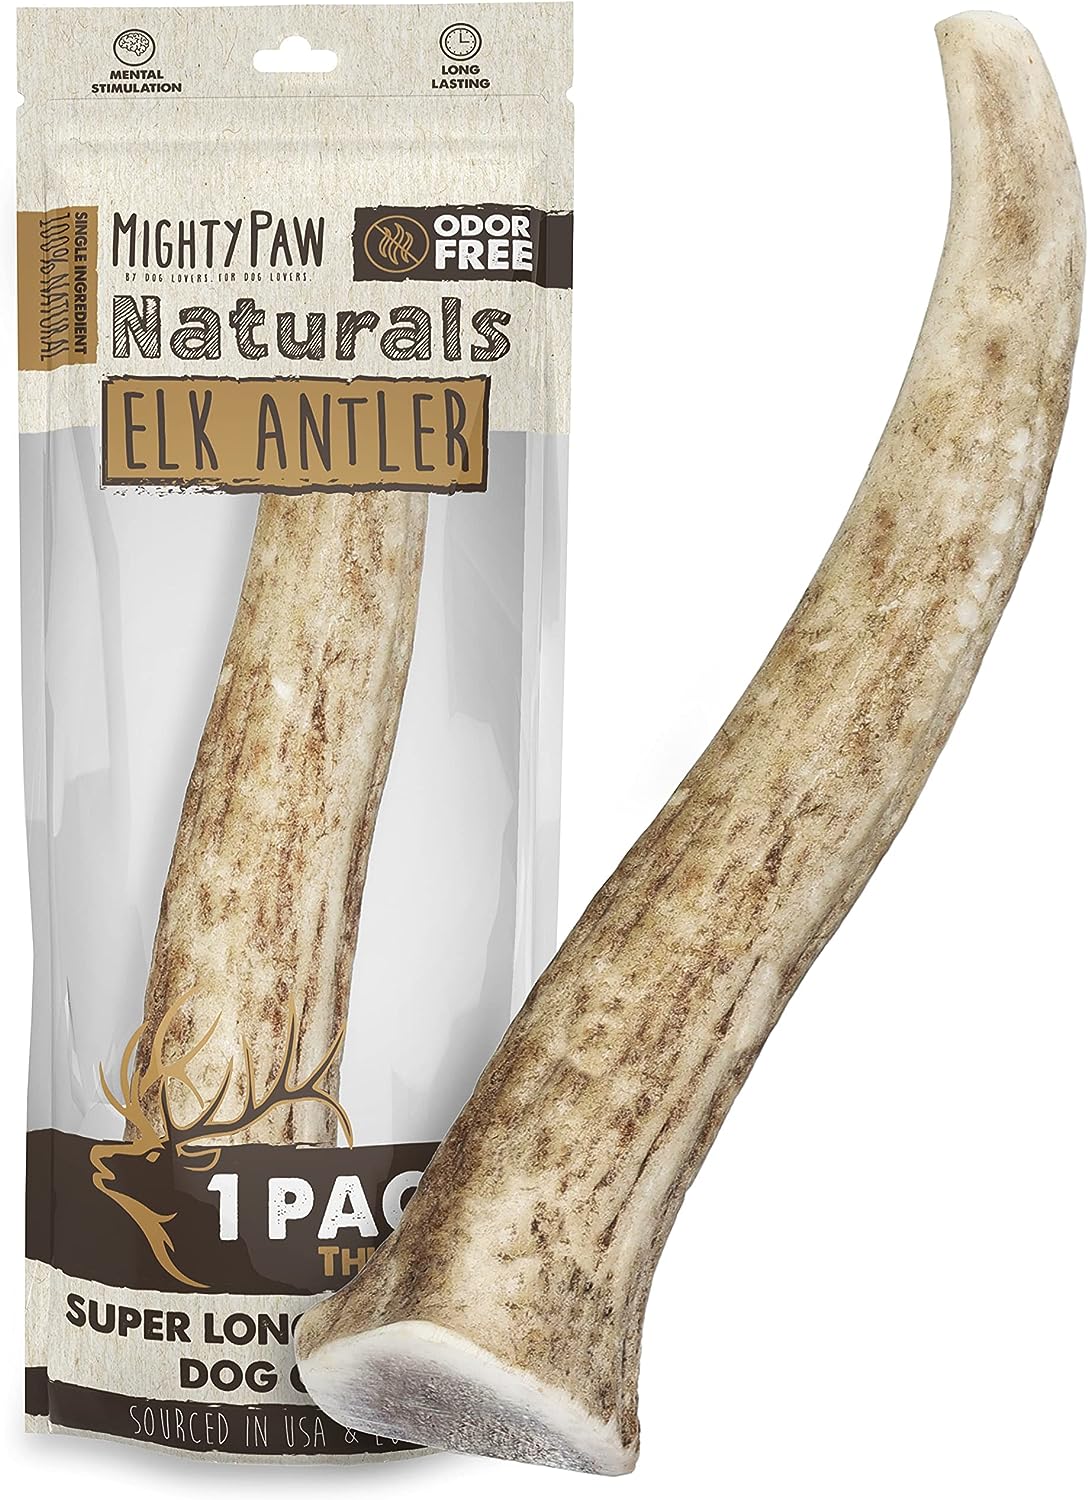 Mighty Paw Elk Antlers for Power Chewers